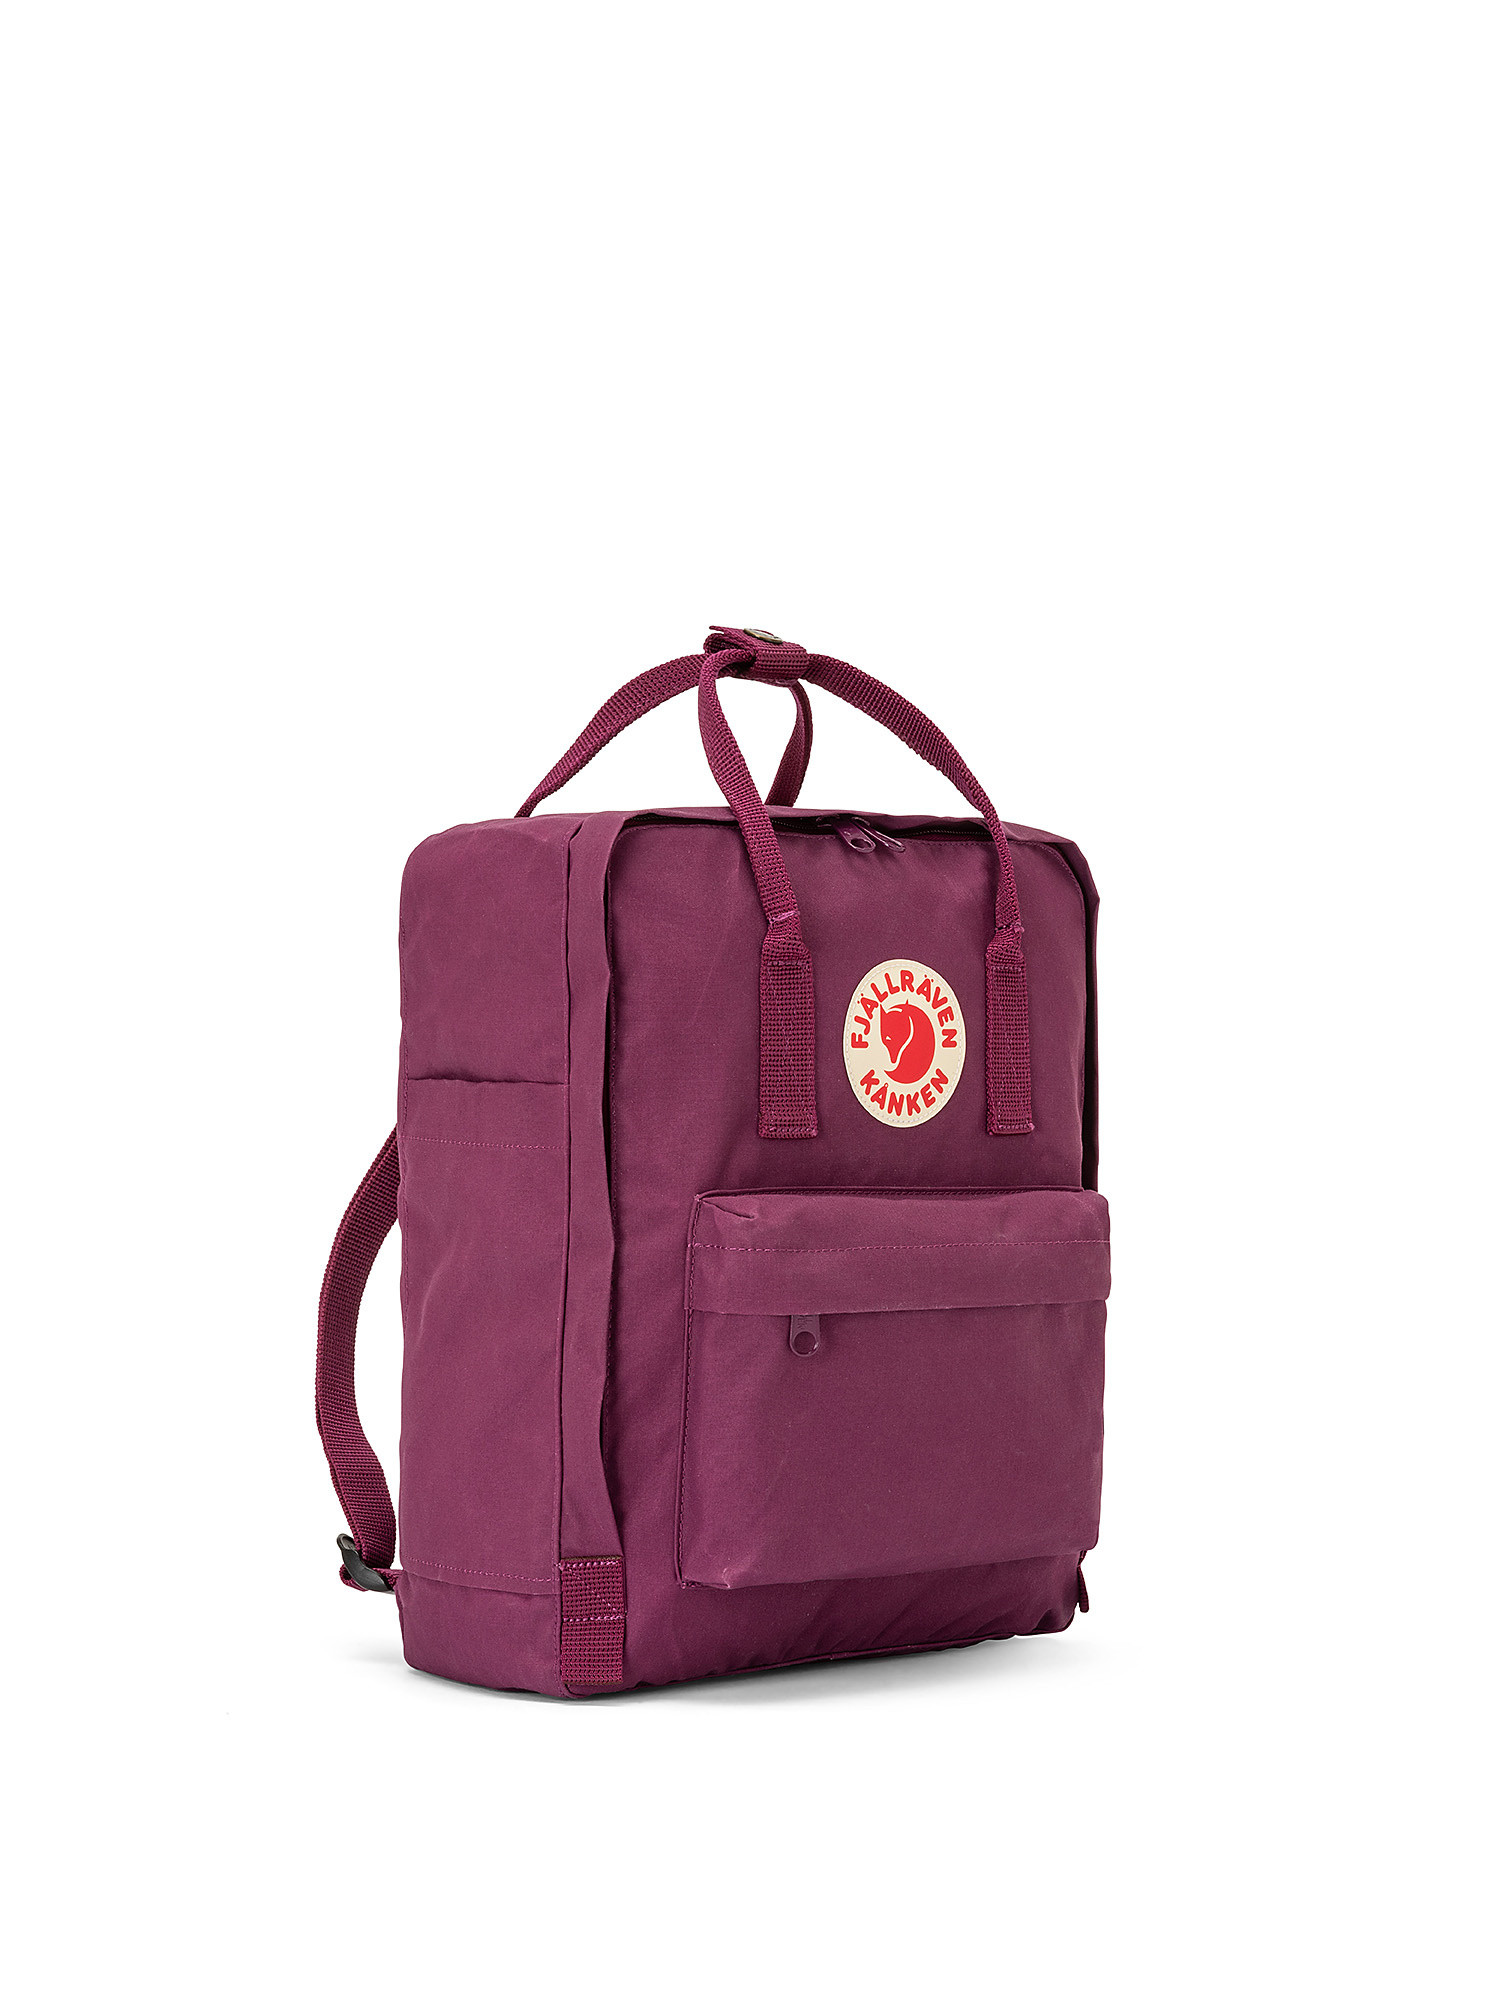 Zaino del brand svedese Fjallraven., Rosso, large image number 1